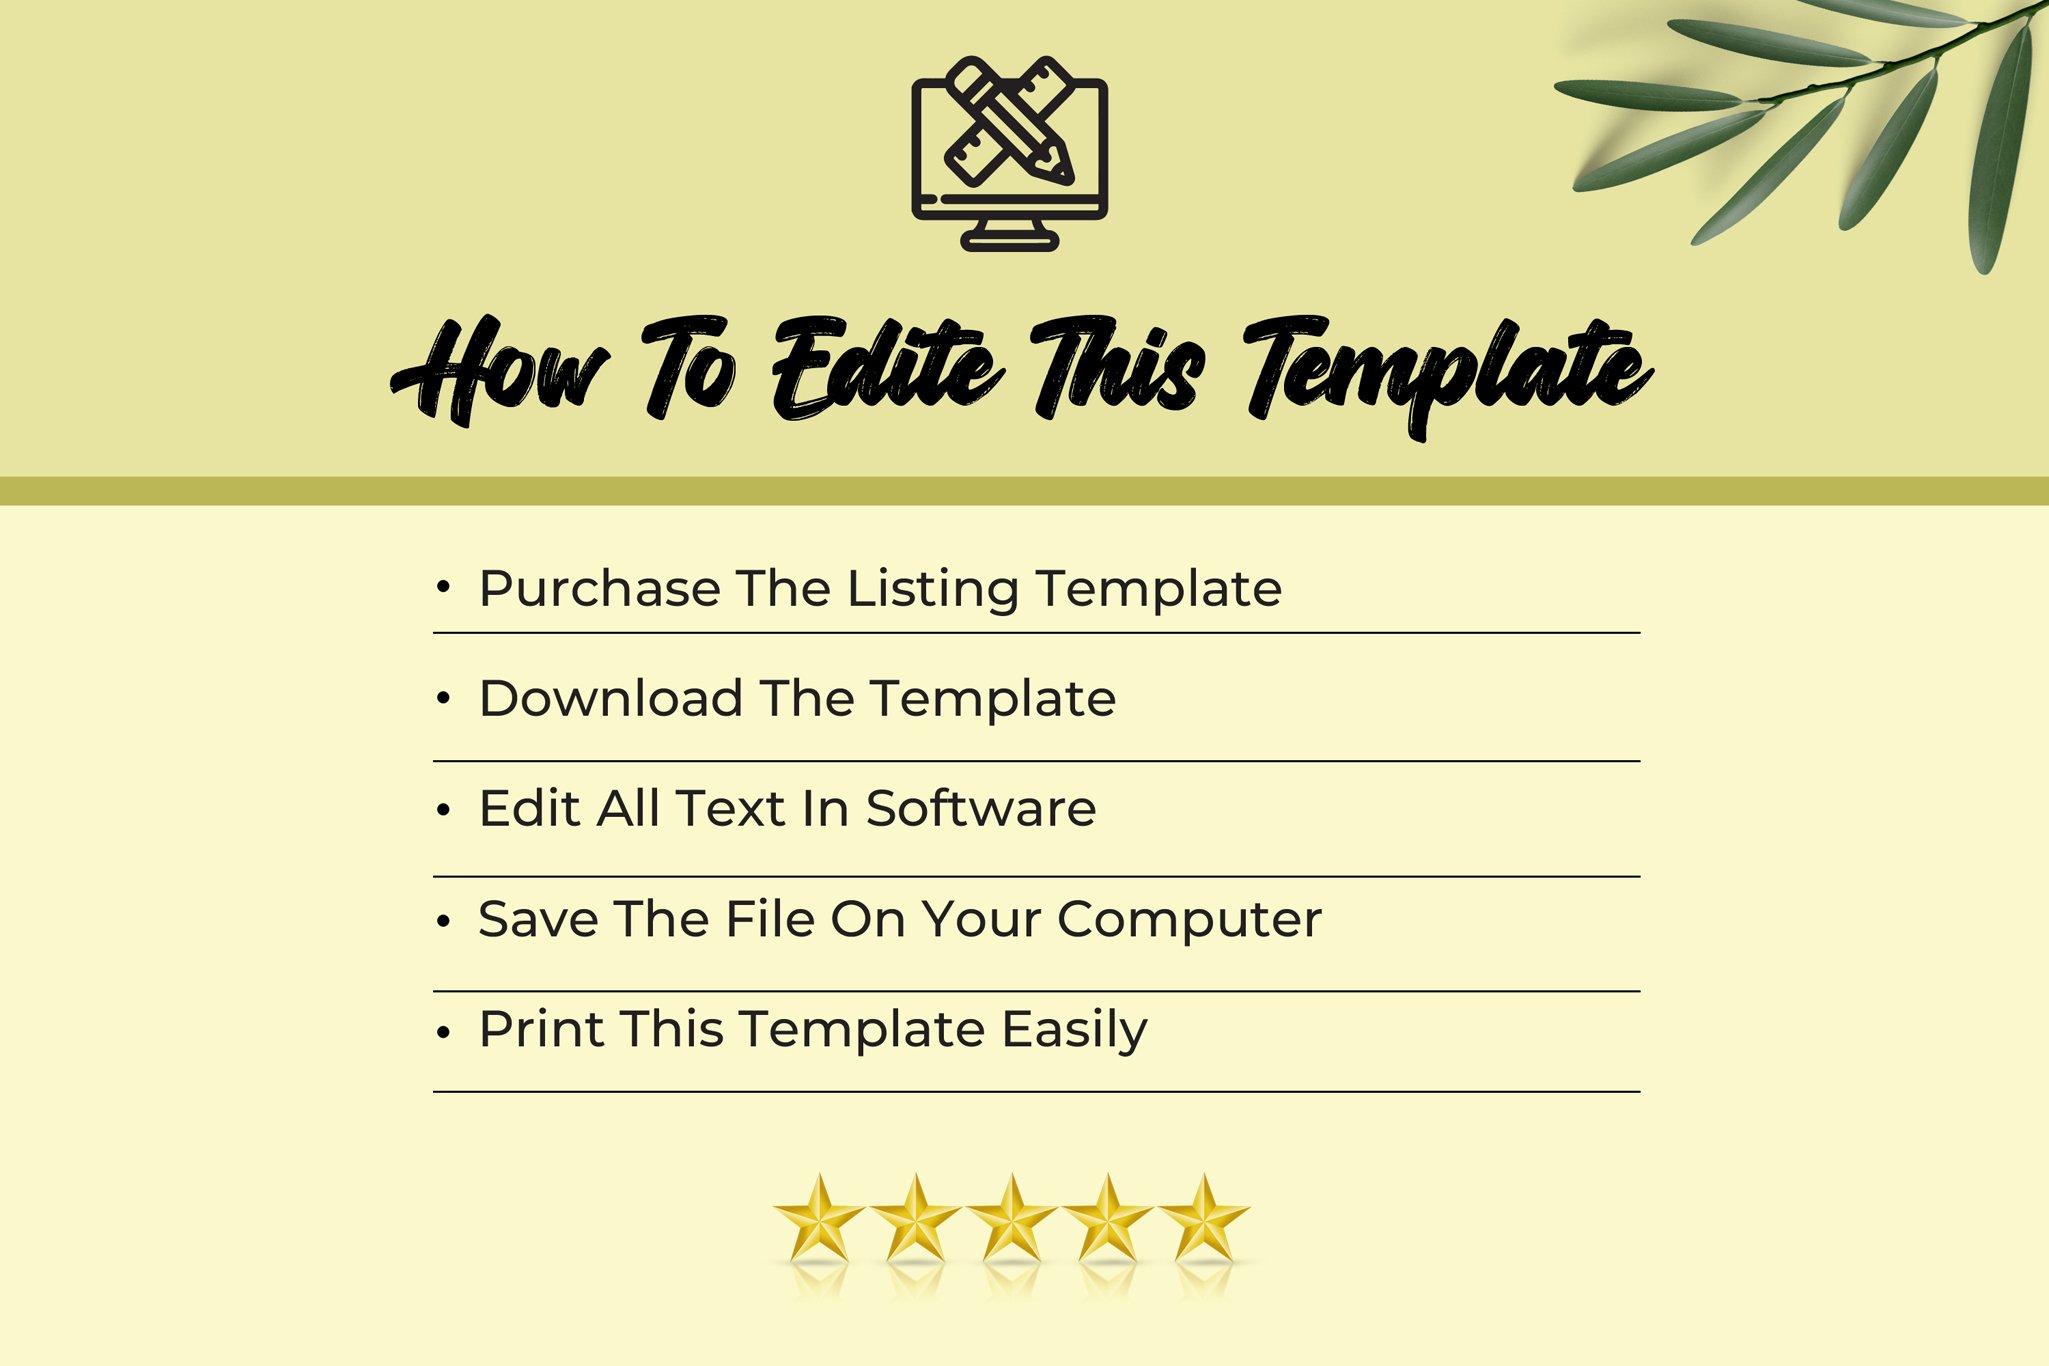 06 how to edite this template 384